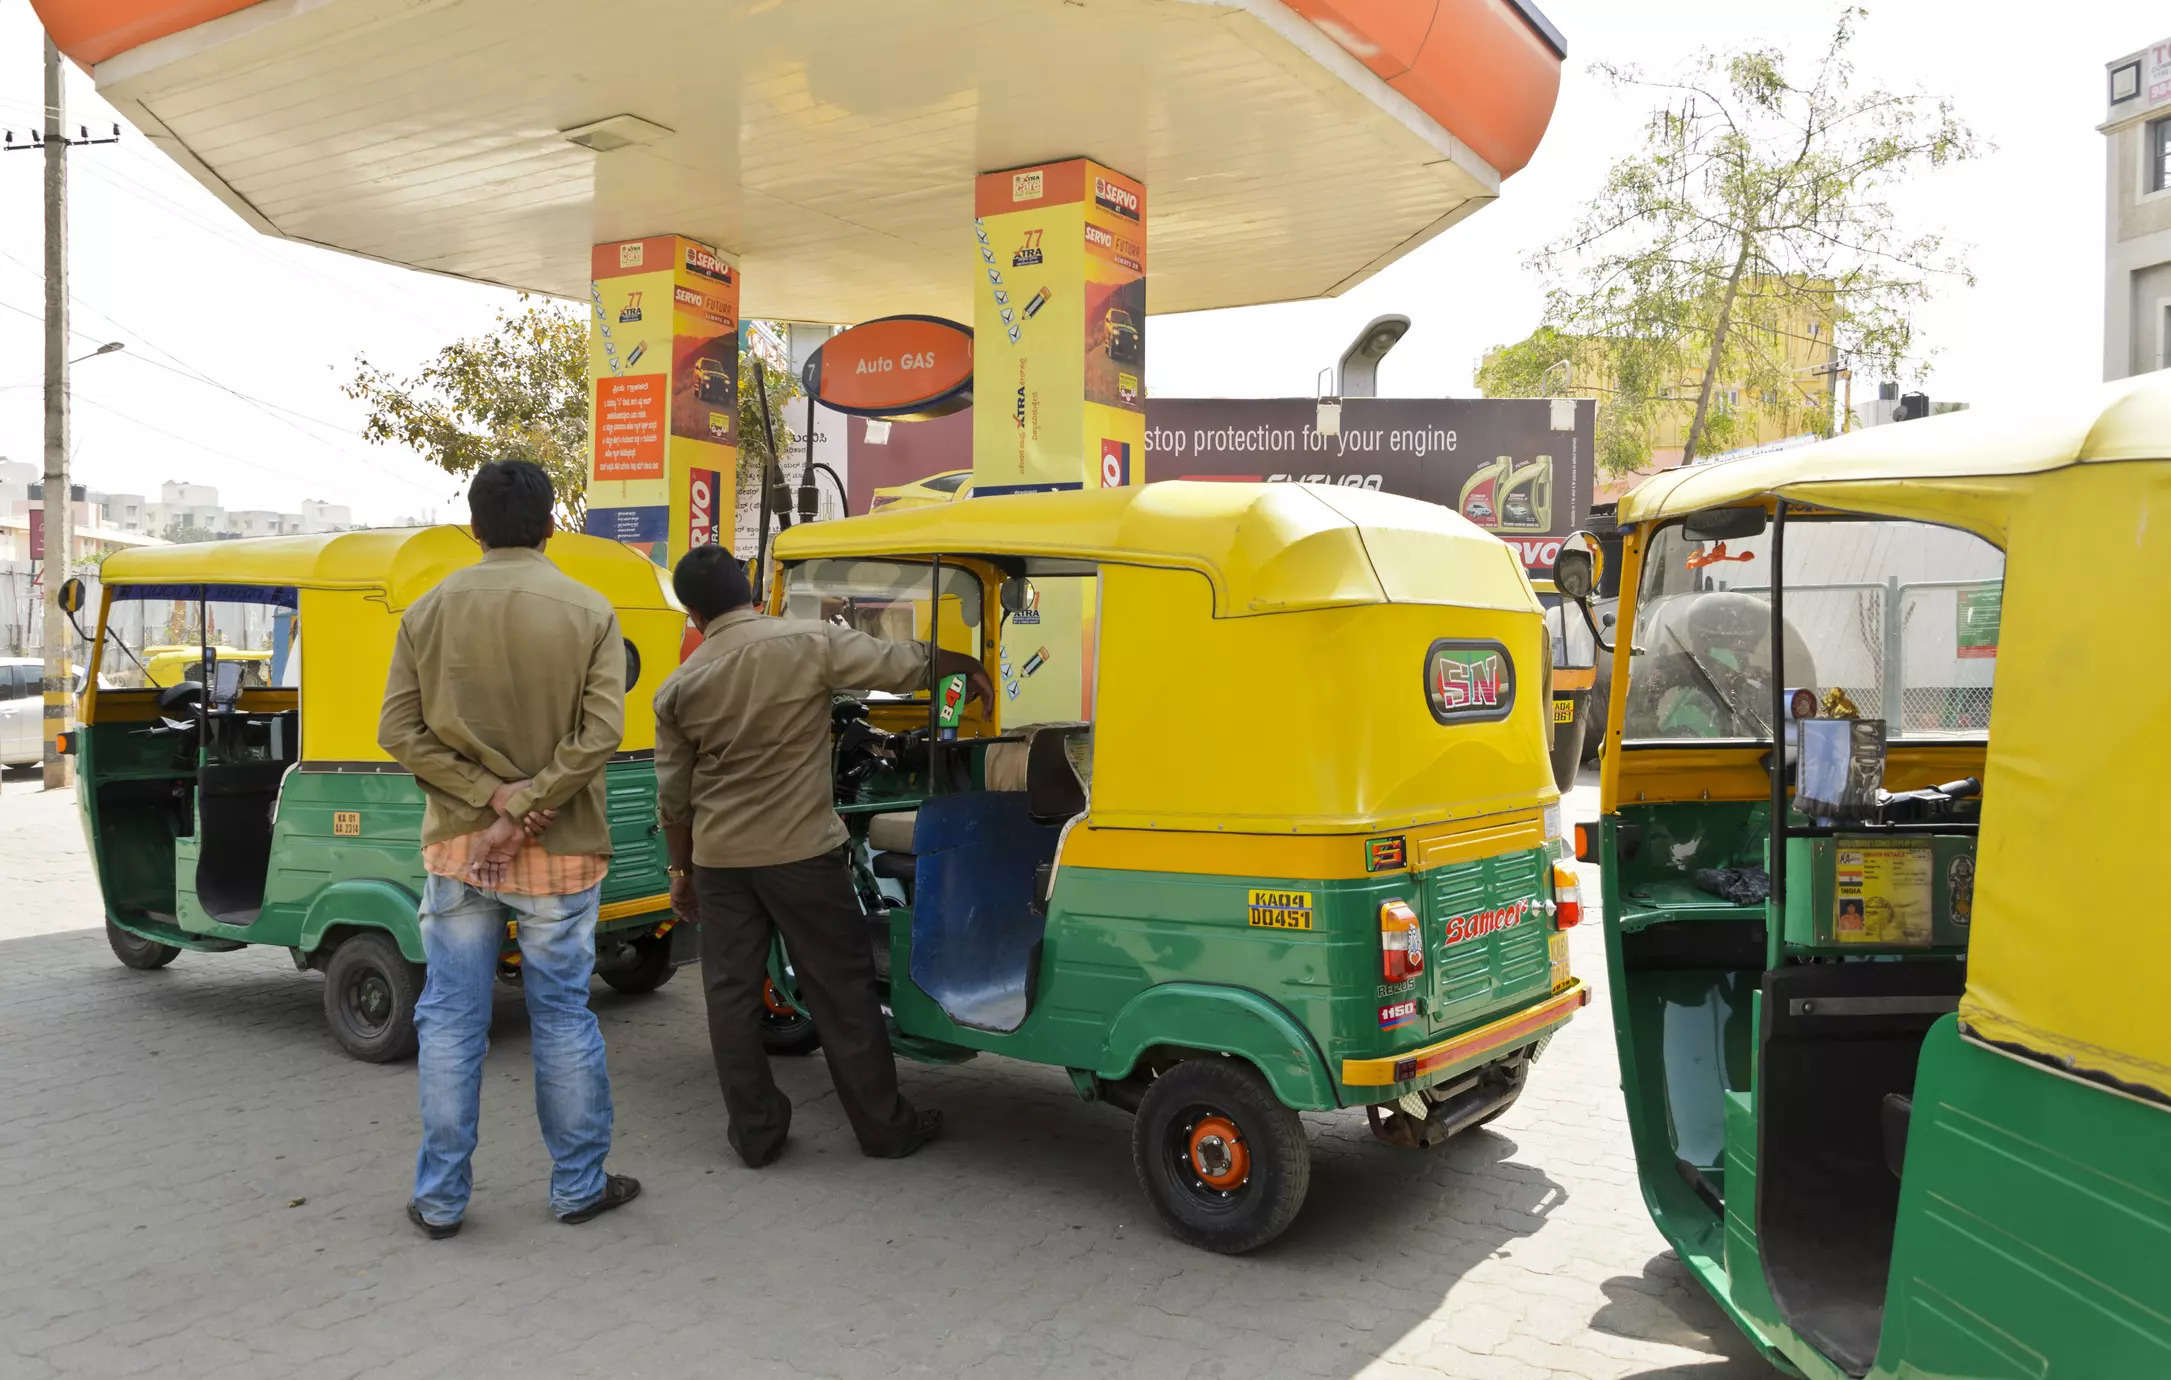 CNG price hike: Auto, cab drivers to go on strike; know details